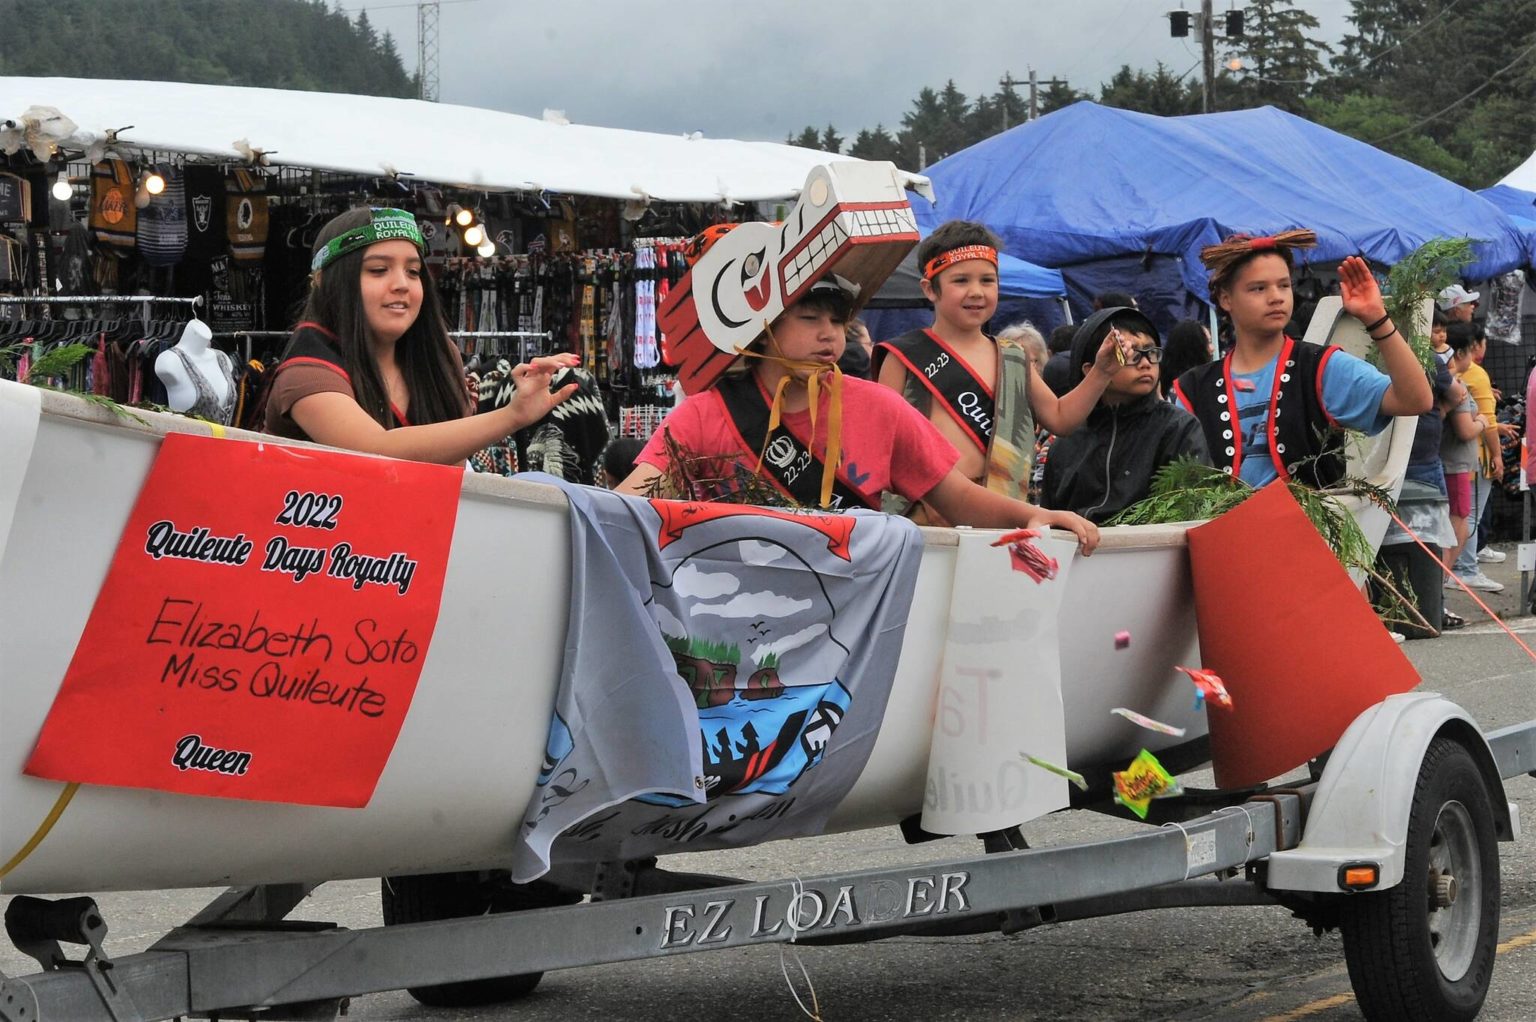 2022 Quileute Days Forks Forum